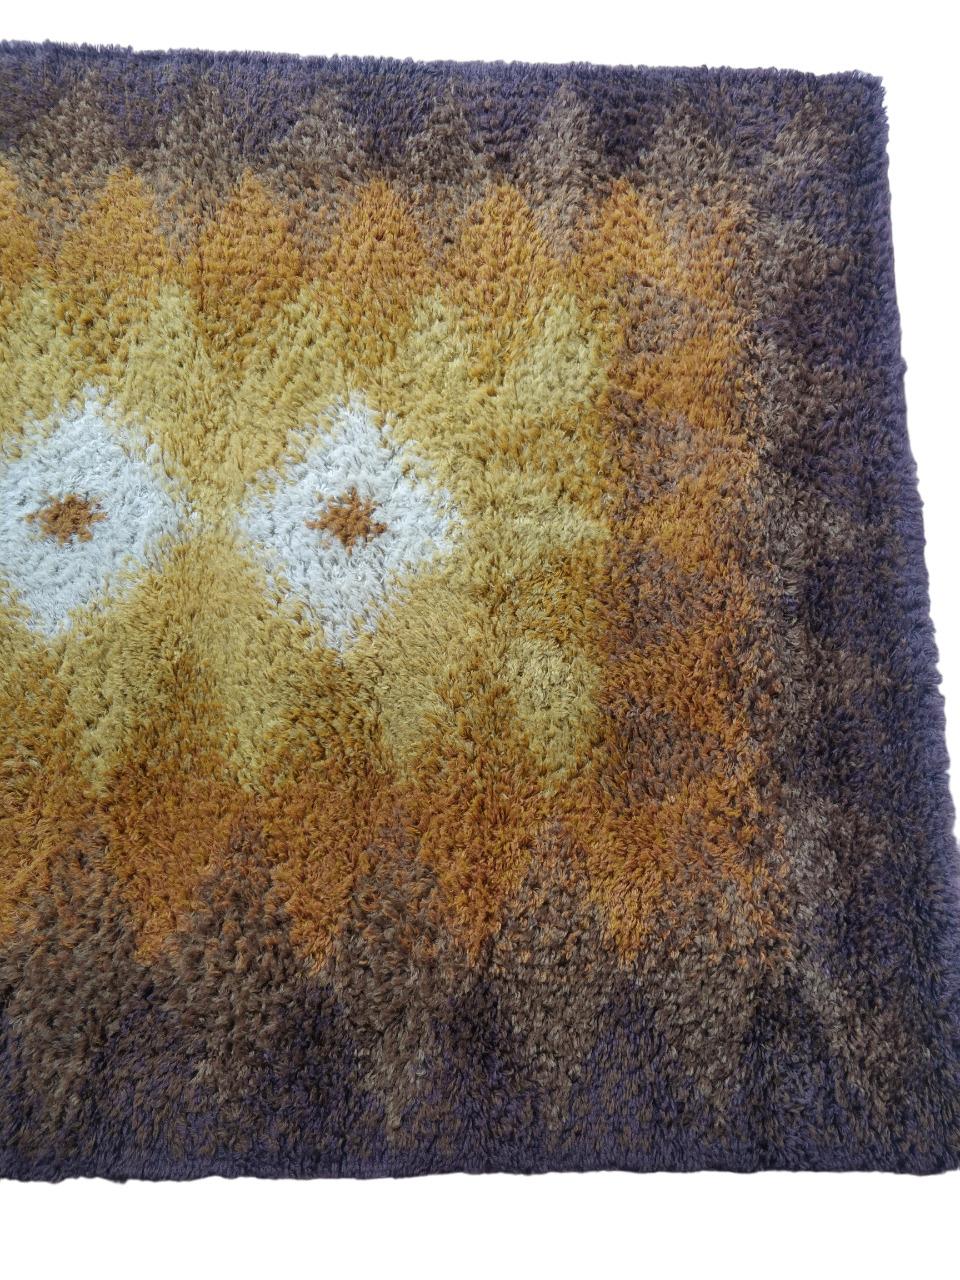 This rug, crafted using the Rya weaving technique in Denmark, is an expression of Nordic design. Made entirely of pure wool, it features a variety of tones ranging from beige to brown, with a diamond pattern in the center on a light background that